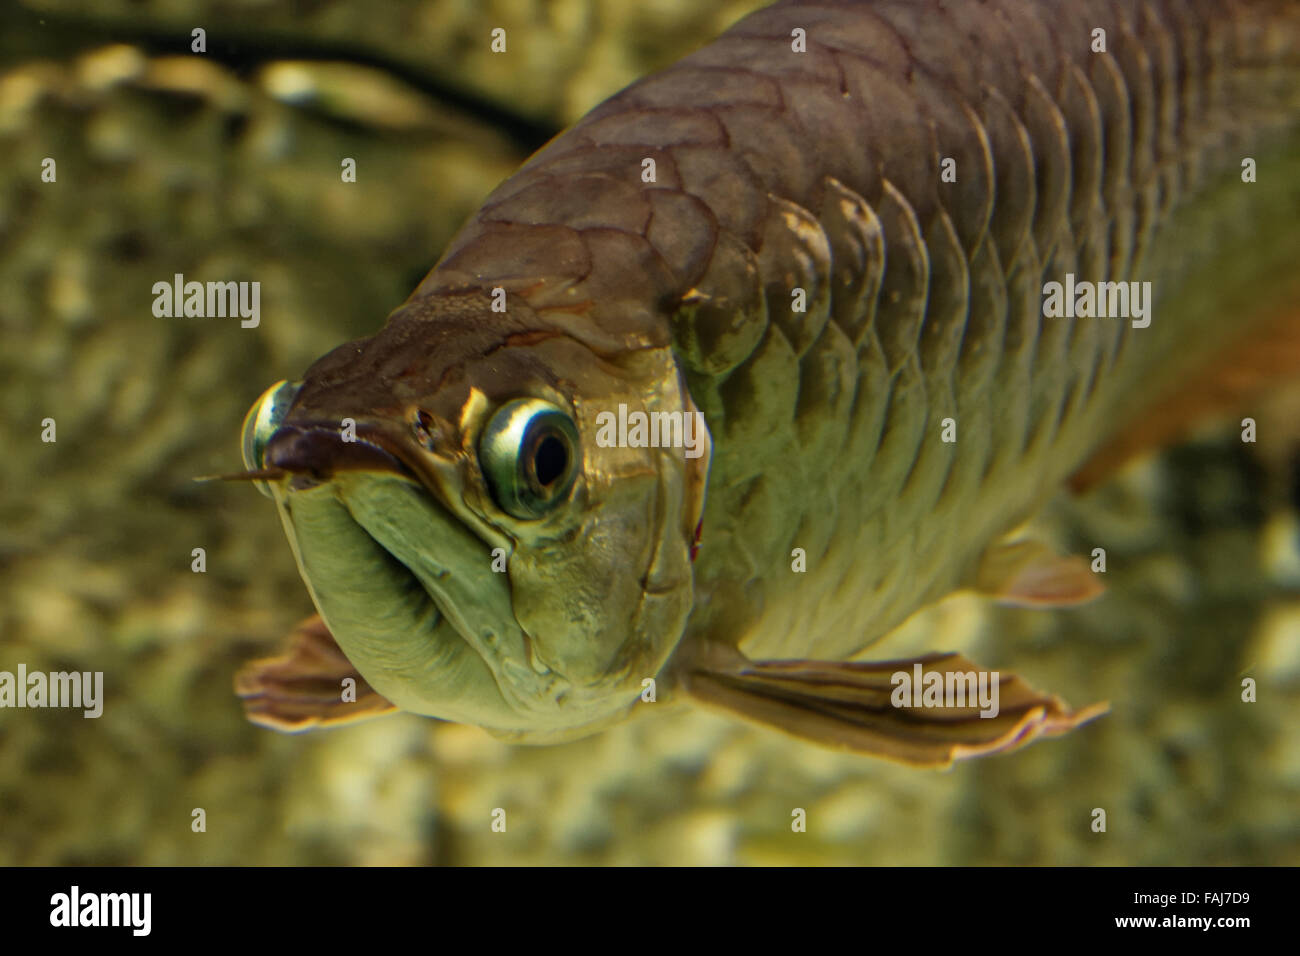 Asian arowana (Scleropages formosus) comprises several phenotypic varieties of freshwater fish. Stock Photo